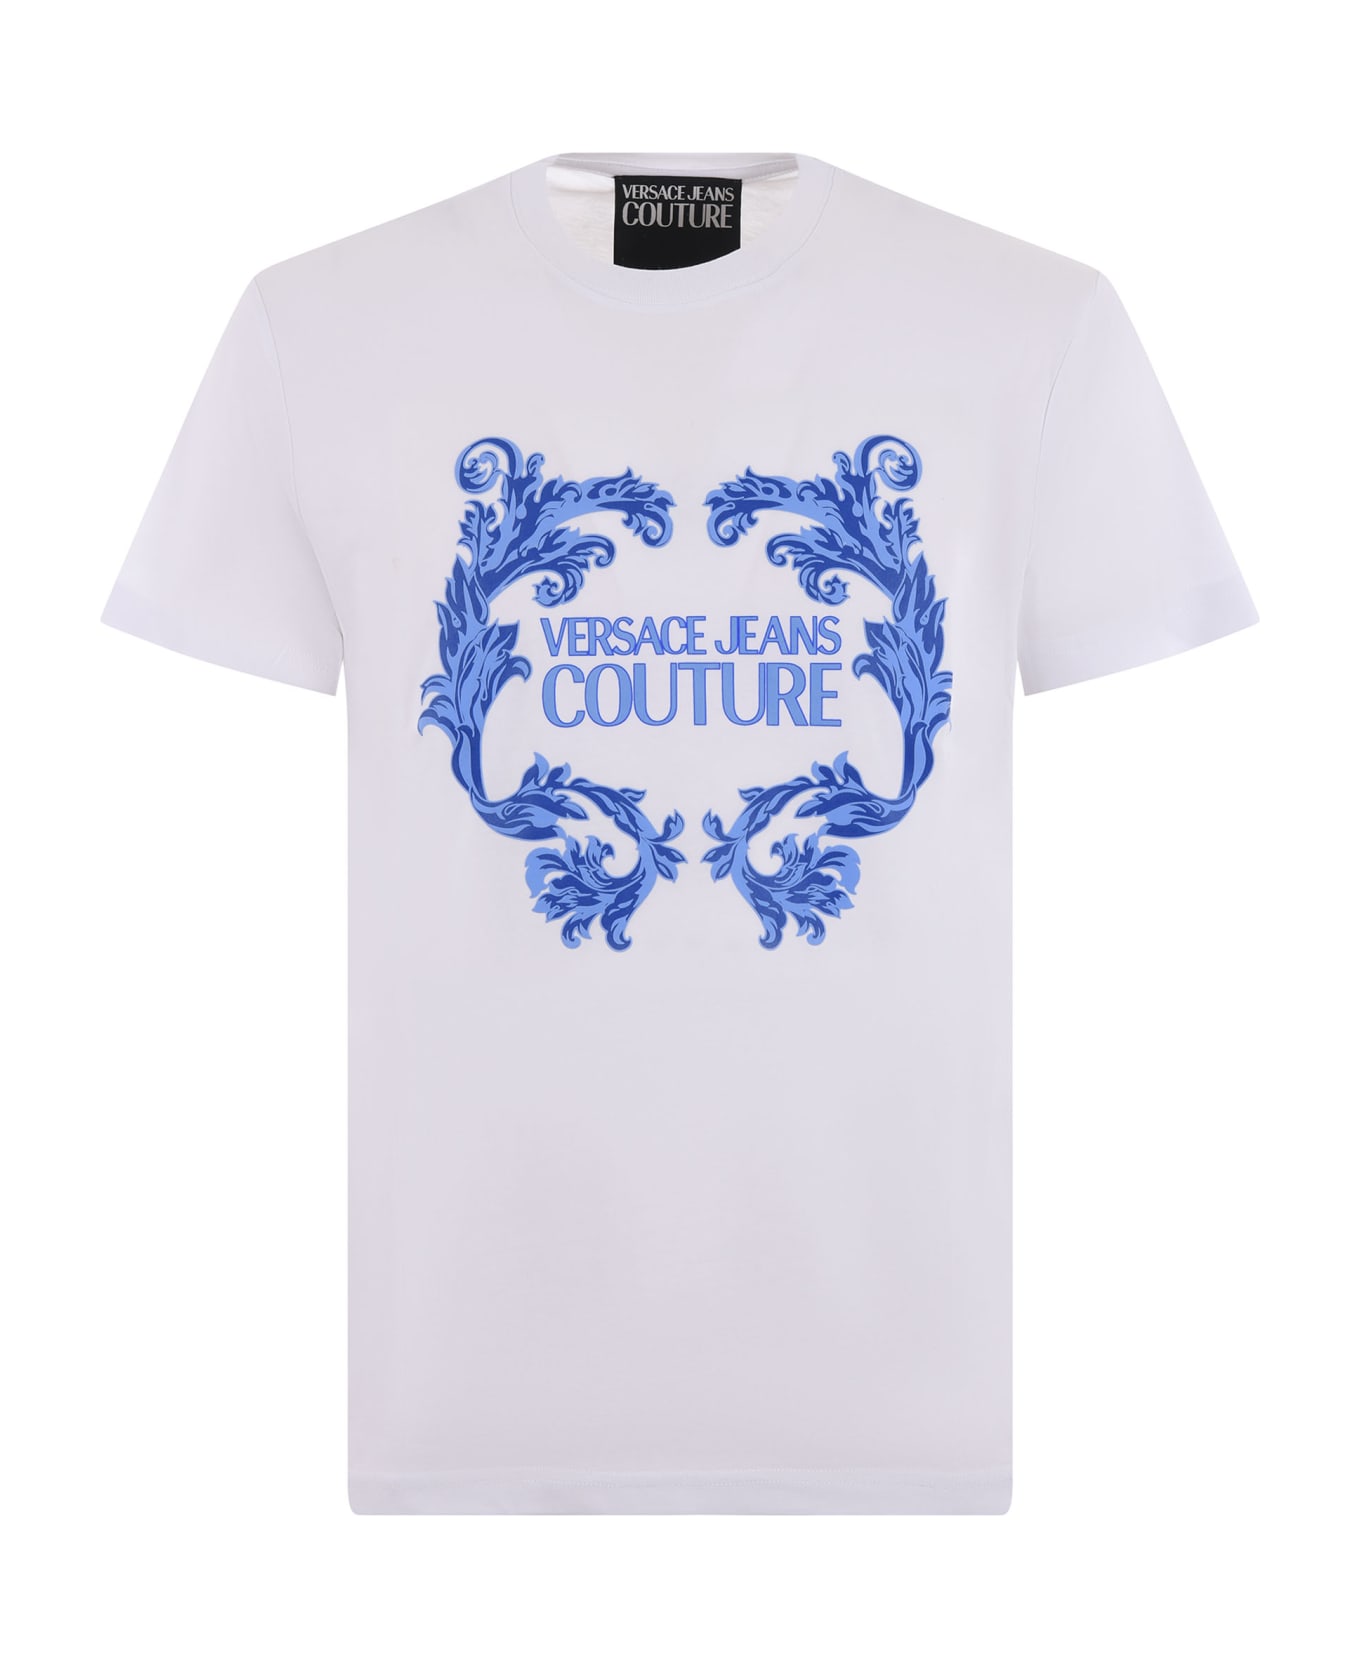 Versace Jeans Couture T-shirt - Bianco/blu